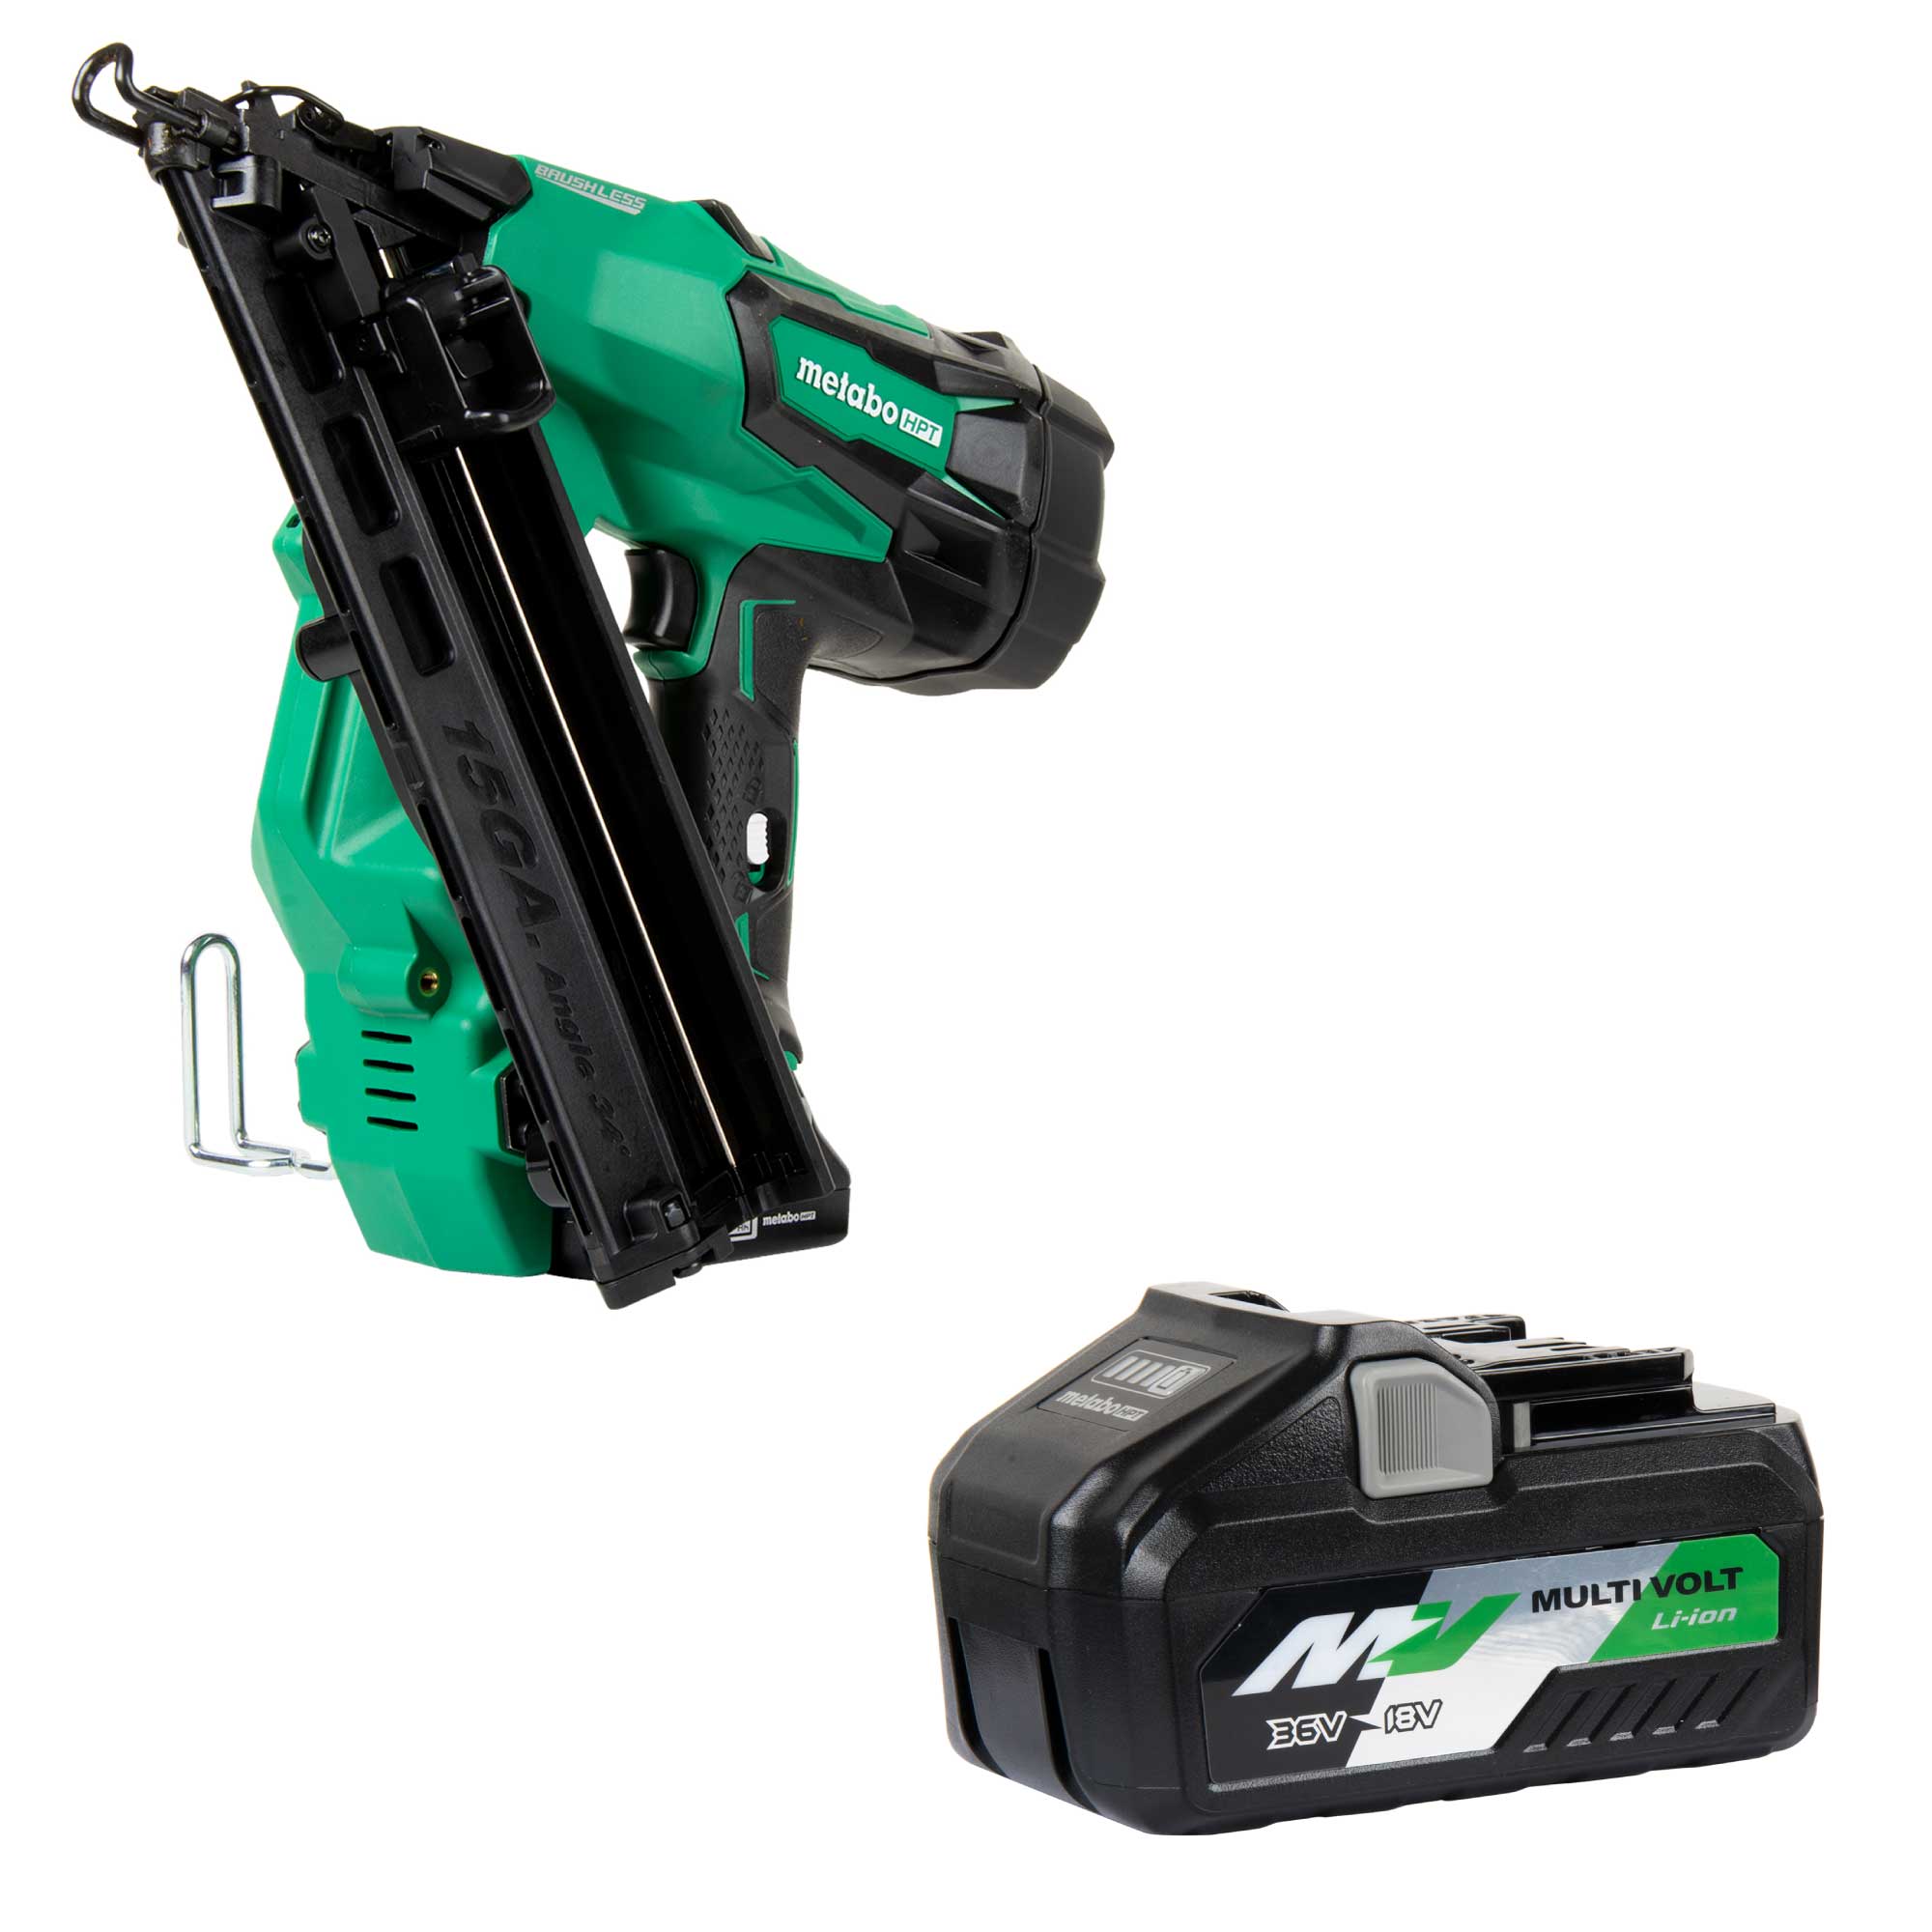 Metabo HPT MultiVolt 18-Volt 15-Gauge Cordless Finish Nailer with MultiVolt 18-volt 1/2-in Brushless Cordless Drill 2-batteries included and charger